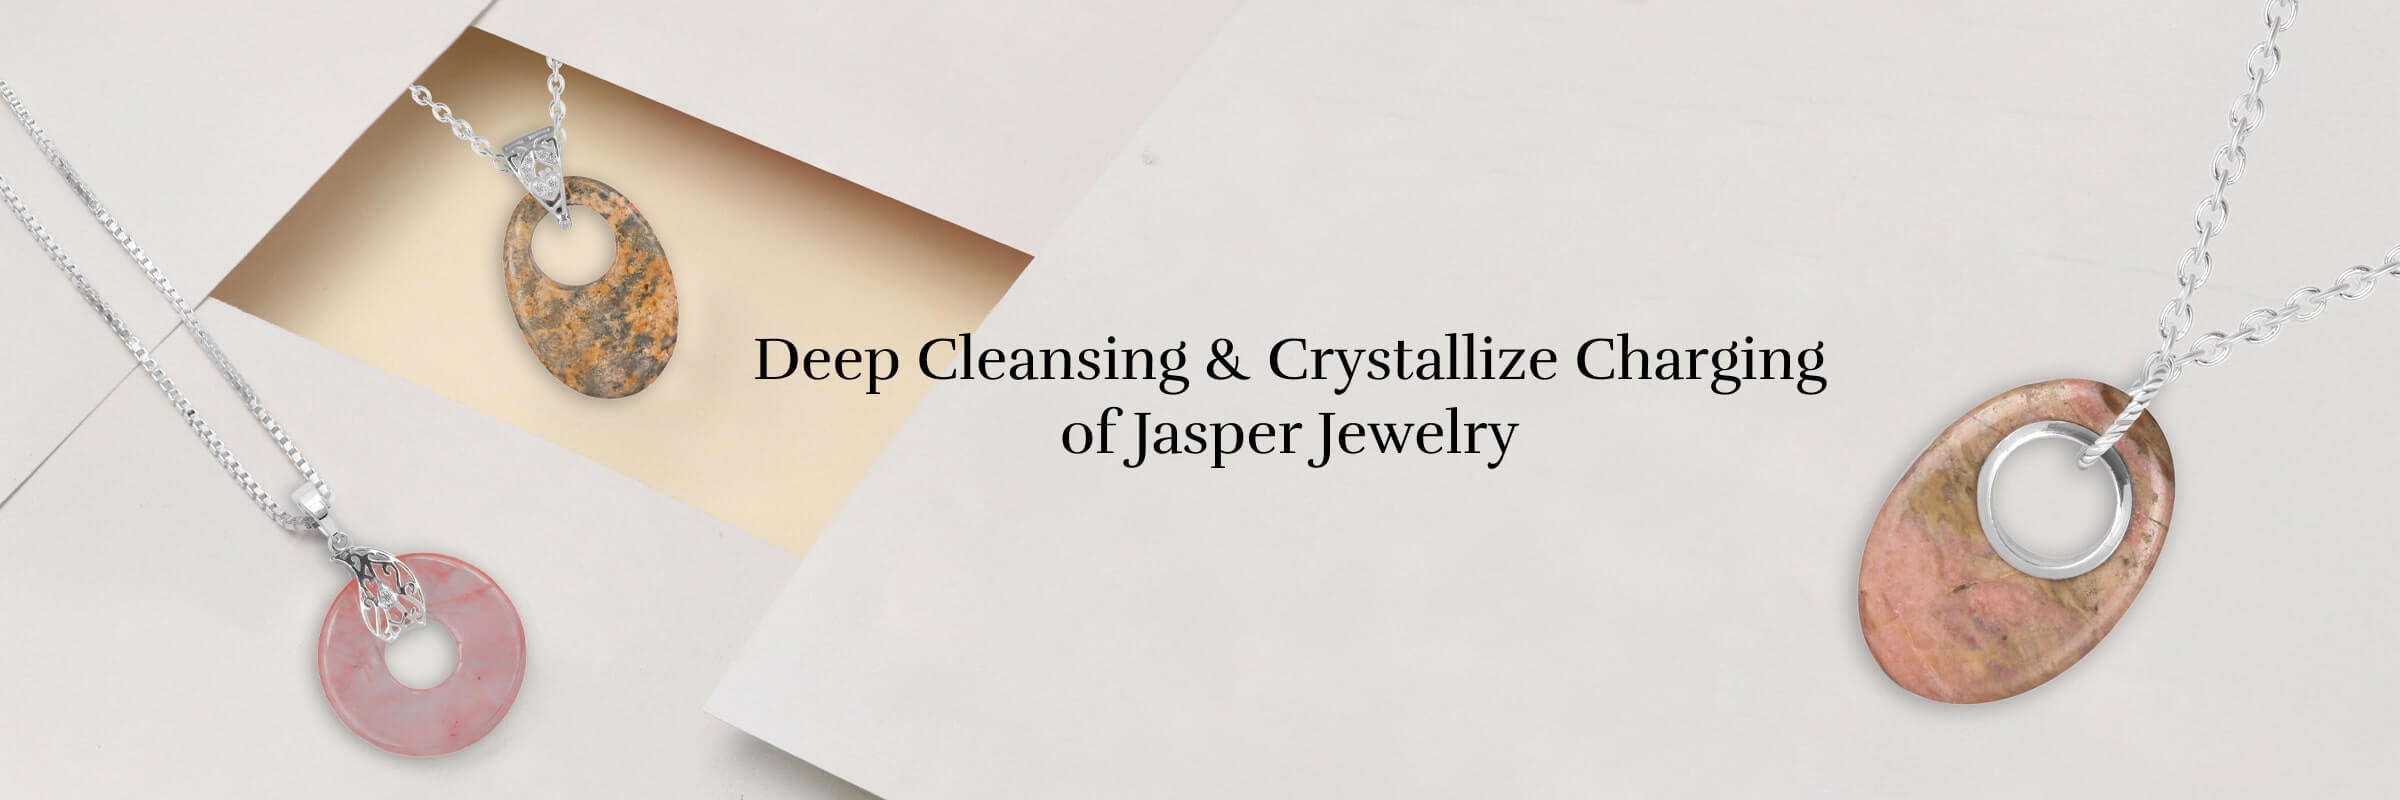 How to Take Care for Jasper Jewelry